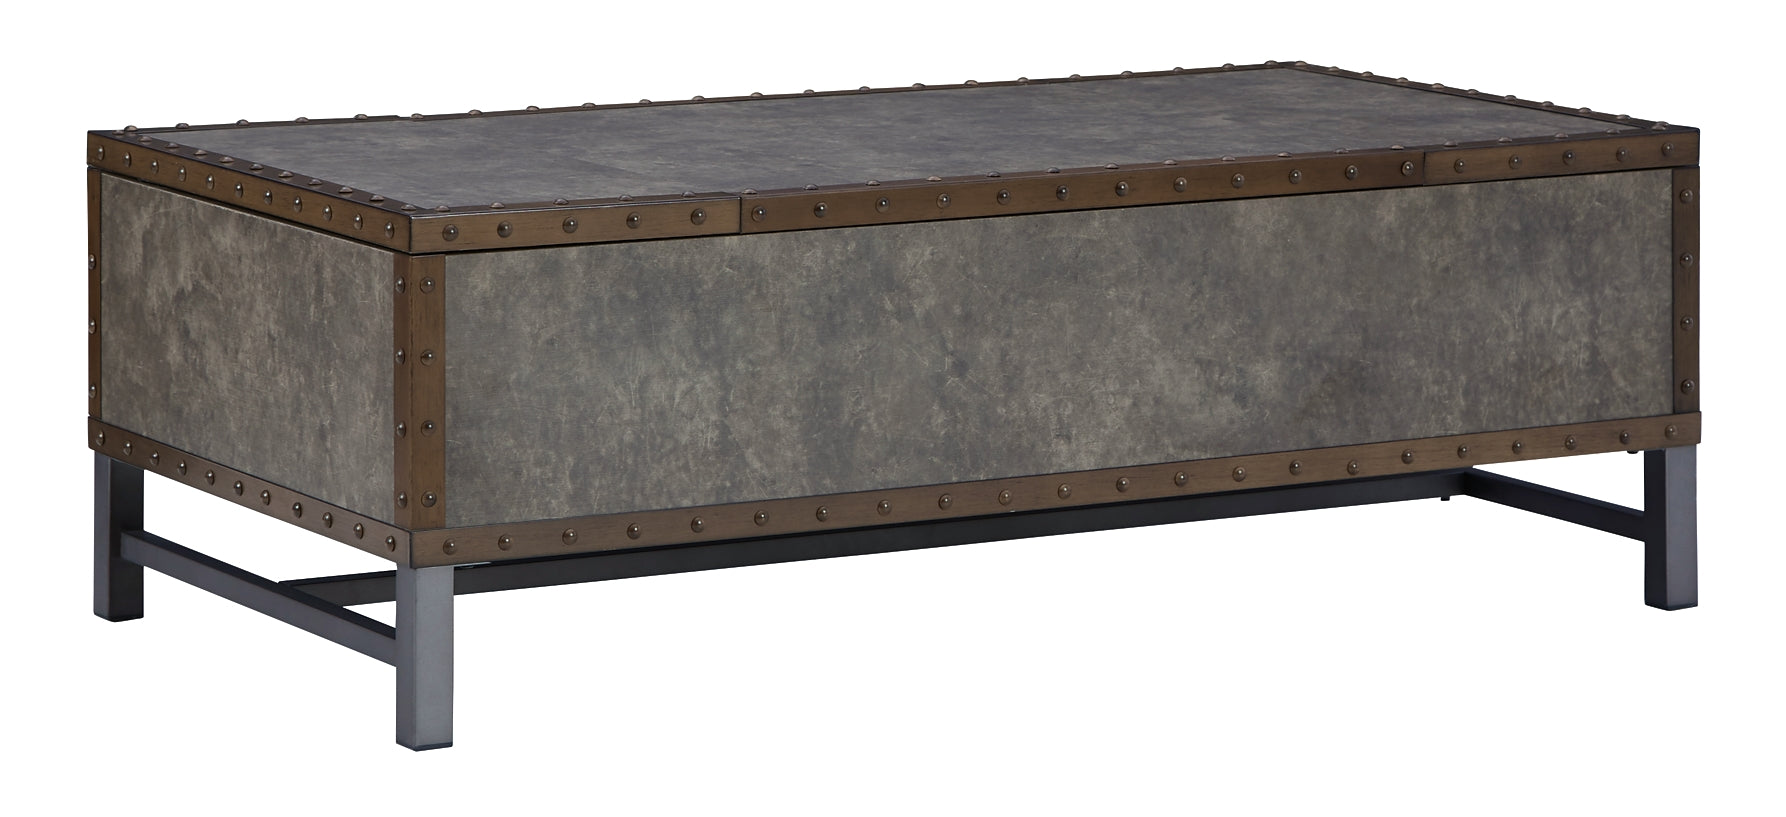 Derrylin Coffee Table with 2 End Tables at Cloud 9 Mattress & Furniture furniture, home furnishing, home decor